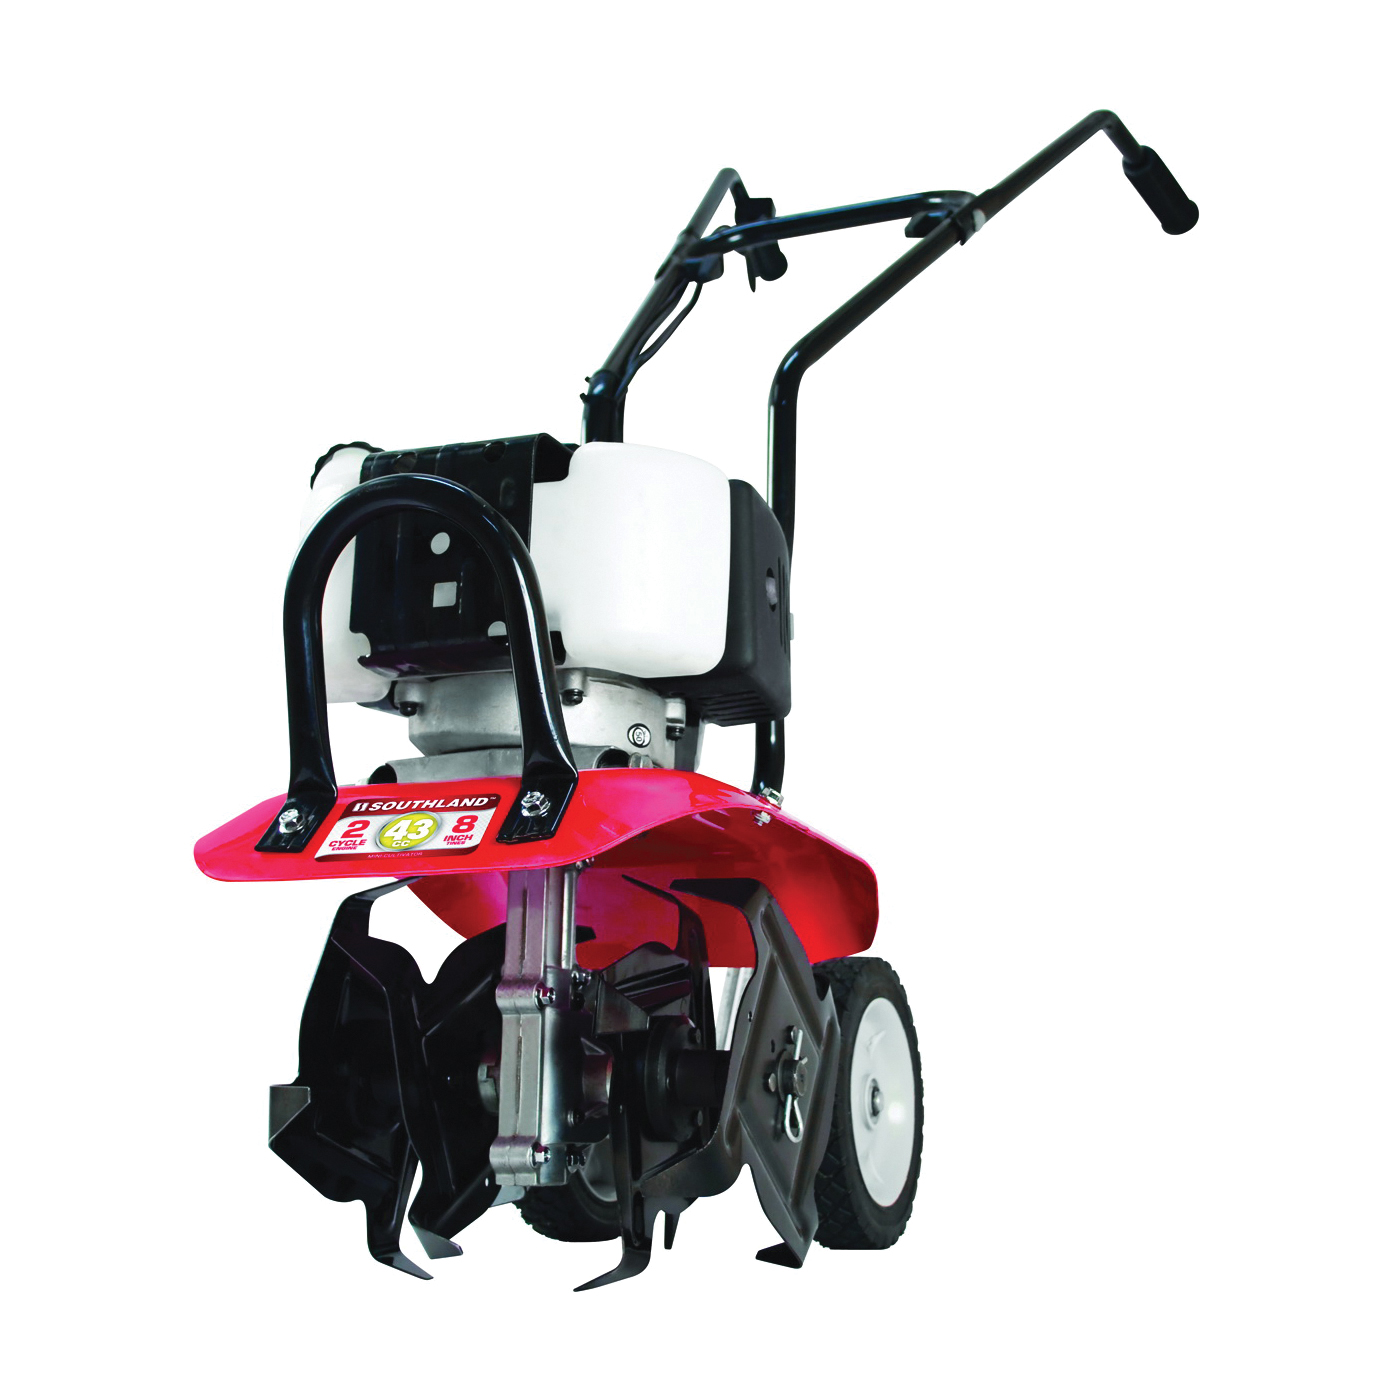 SVC43 Powered Cultivator, Unleaded Gas, 43 cc Engine Displacement, 2-Cycle Engine, 5 in Max Tilling D